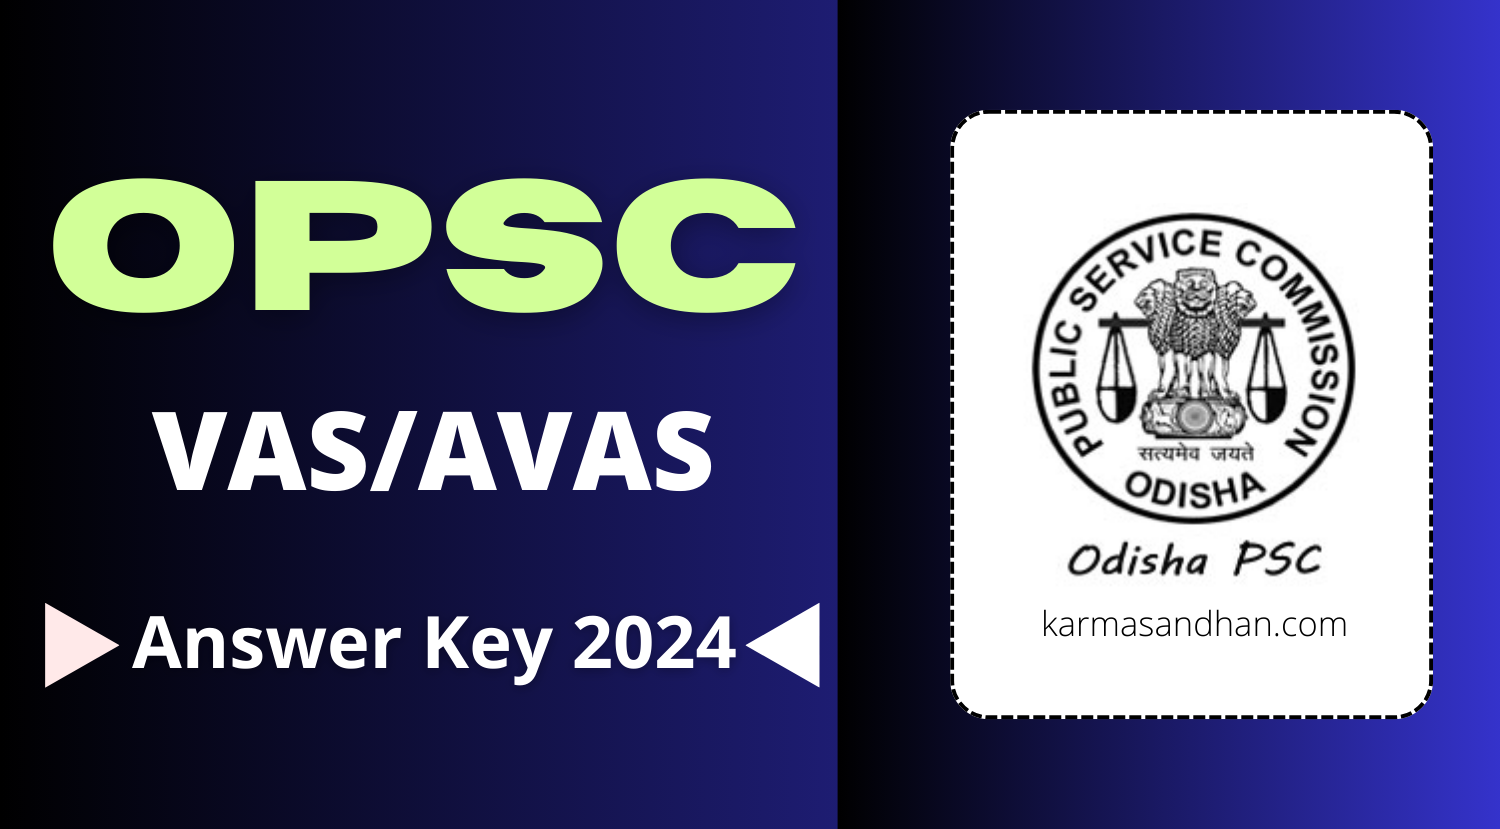 OPSC VAS/AVAS Answer Key 2024 OUT, Check how to download 